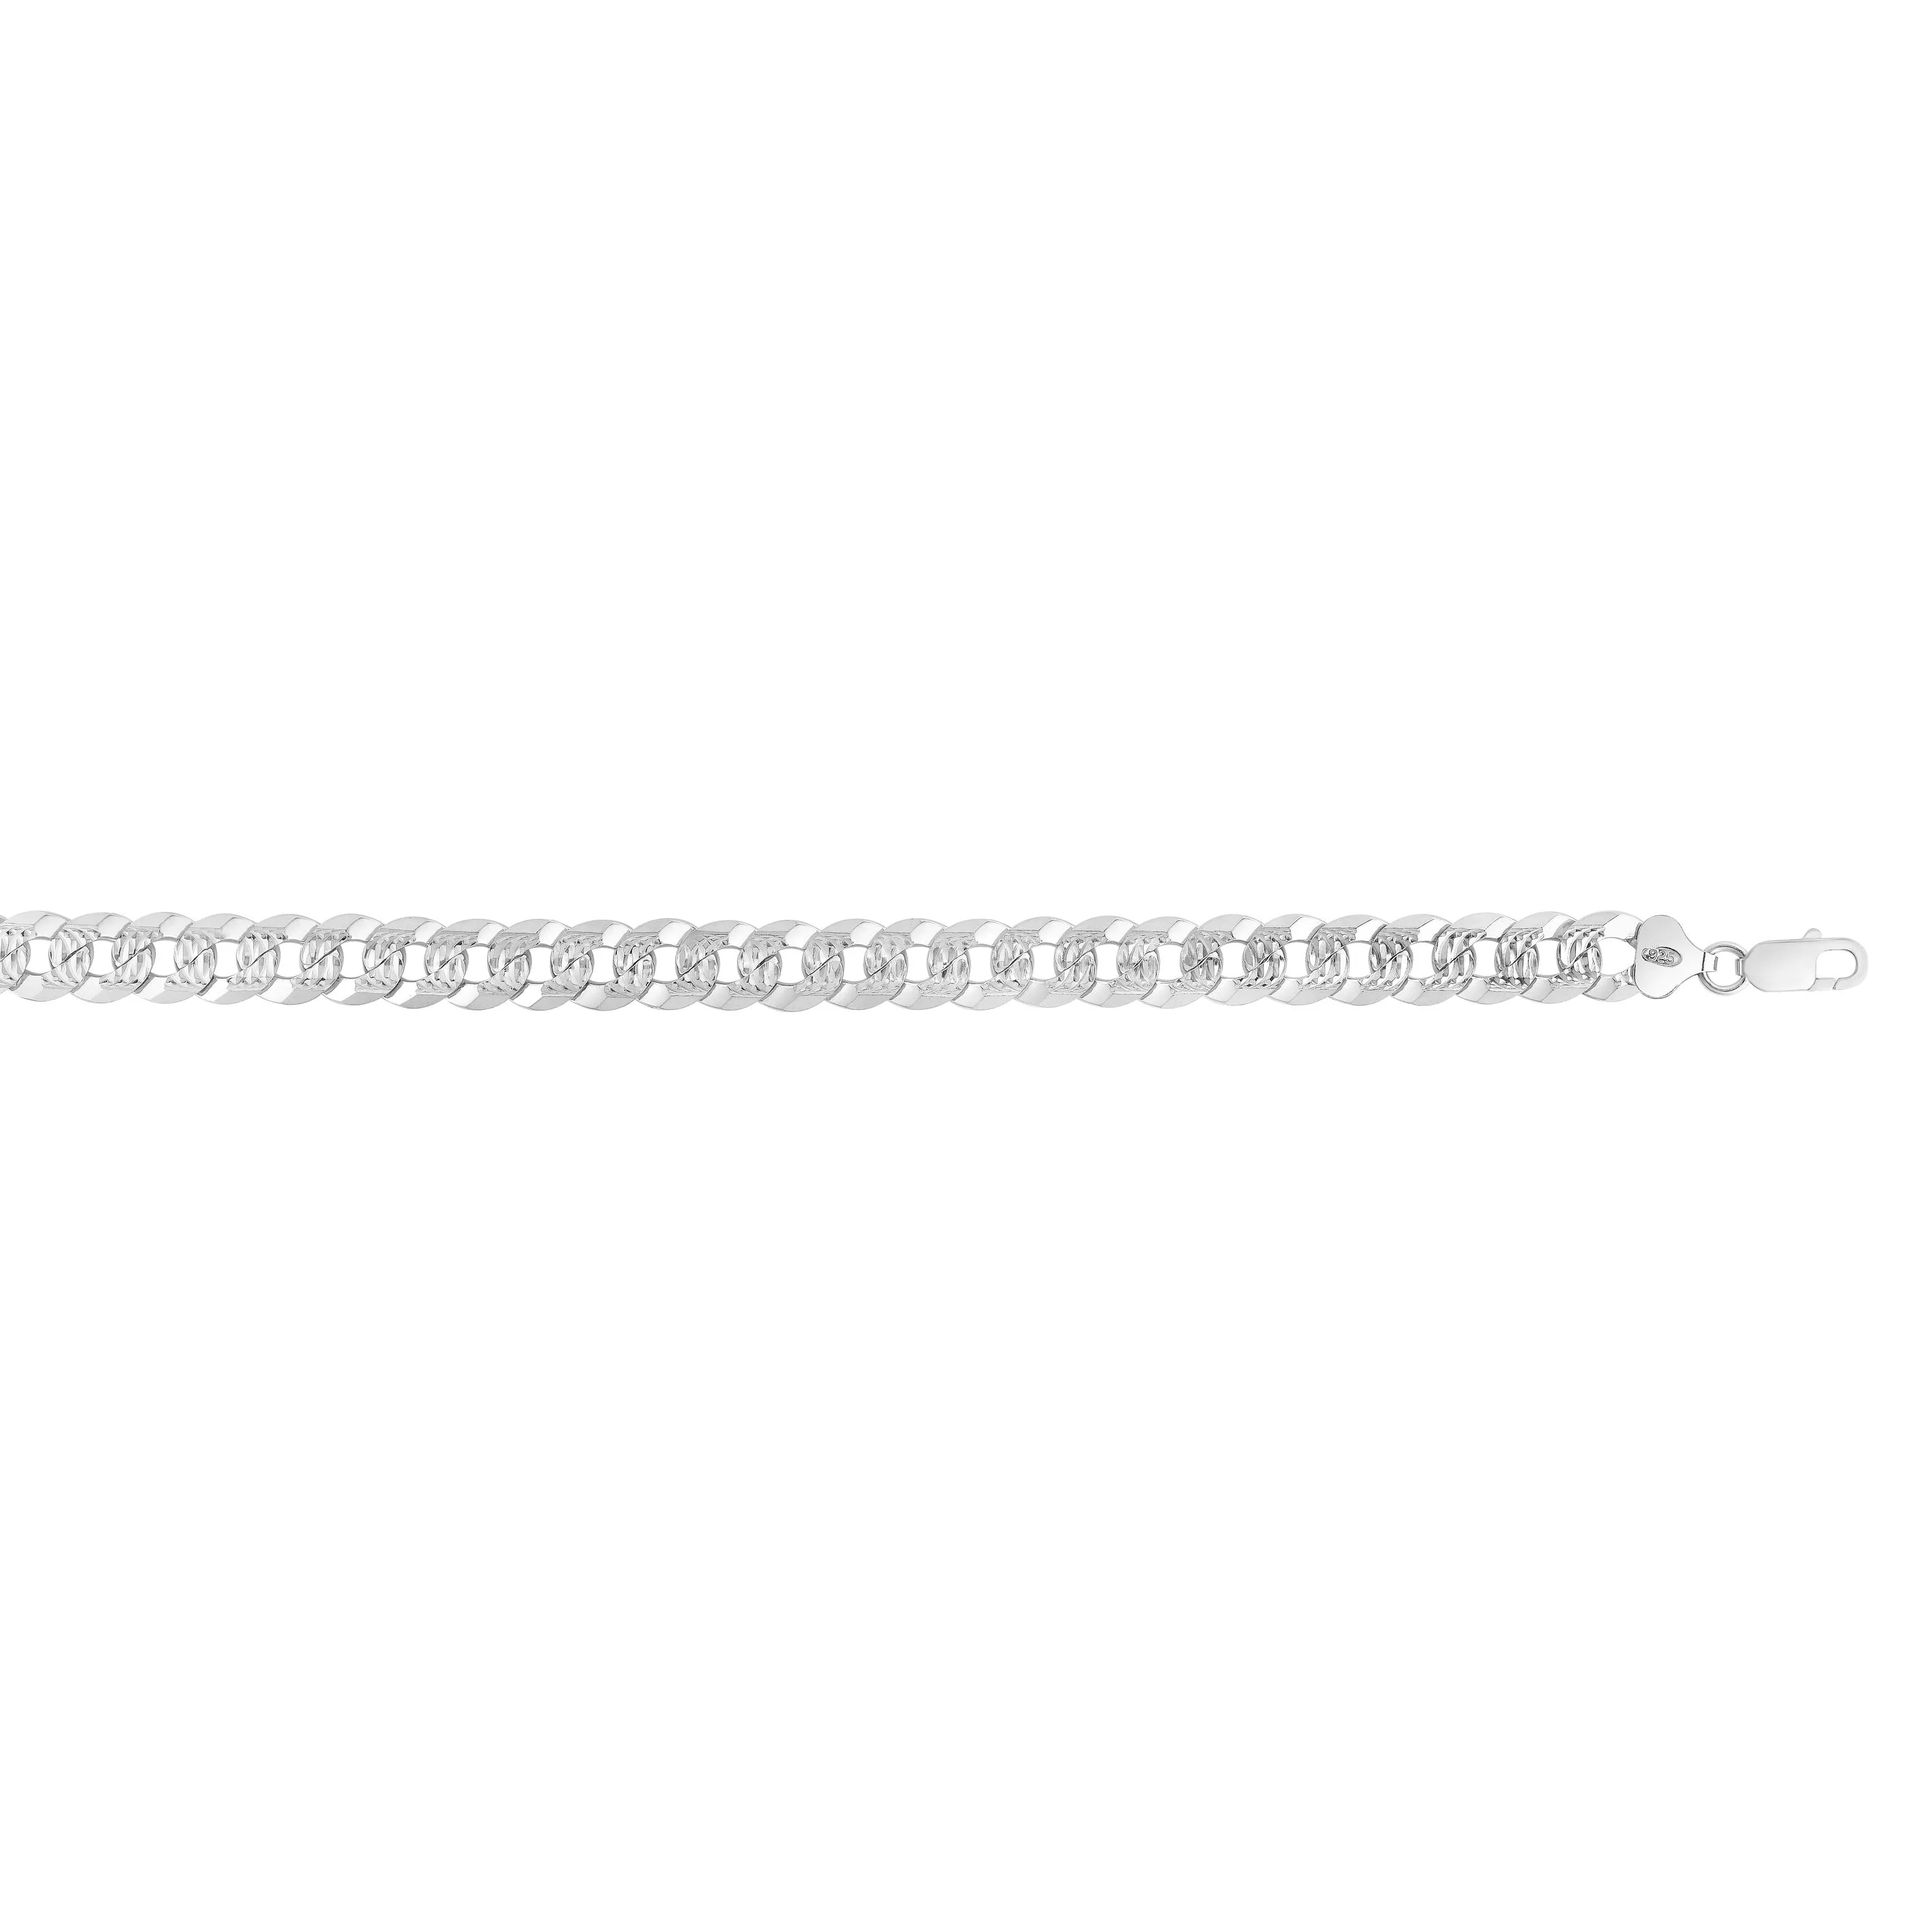 Silver 9.3mm White Pave Curb Chain